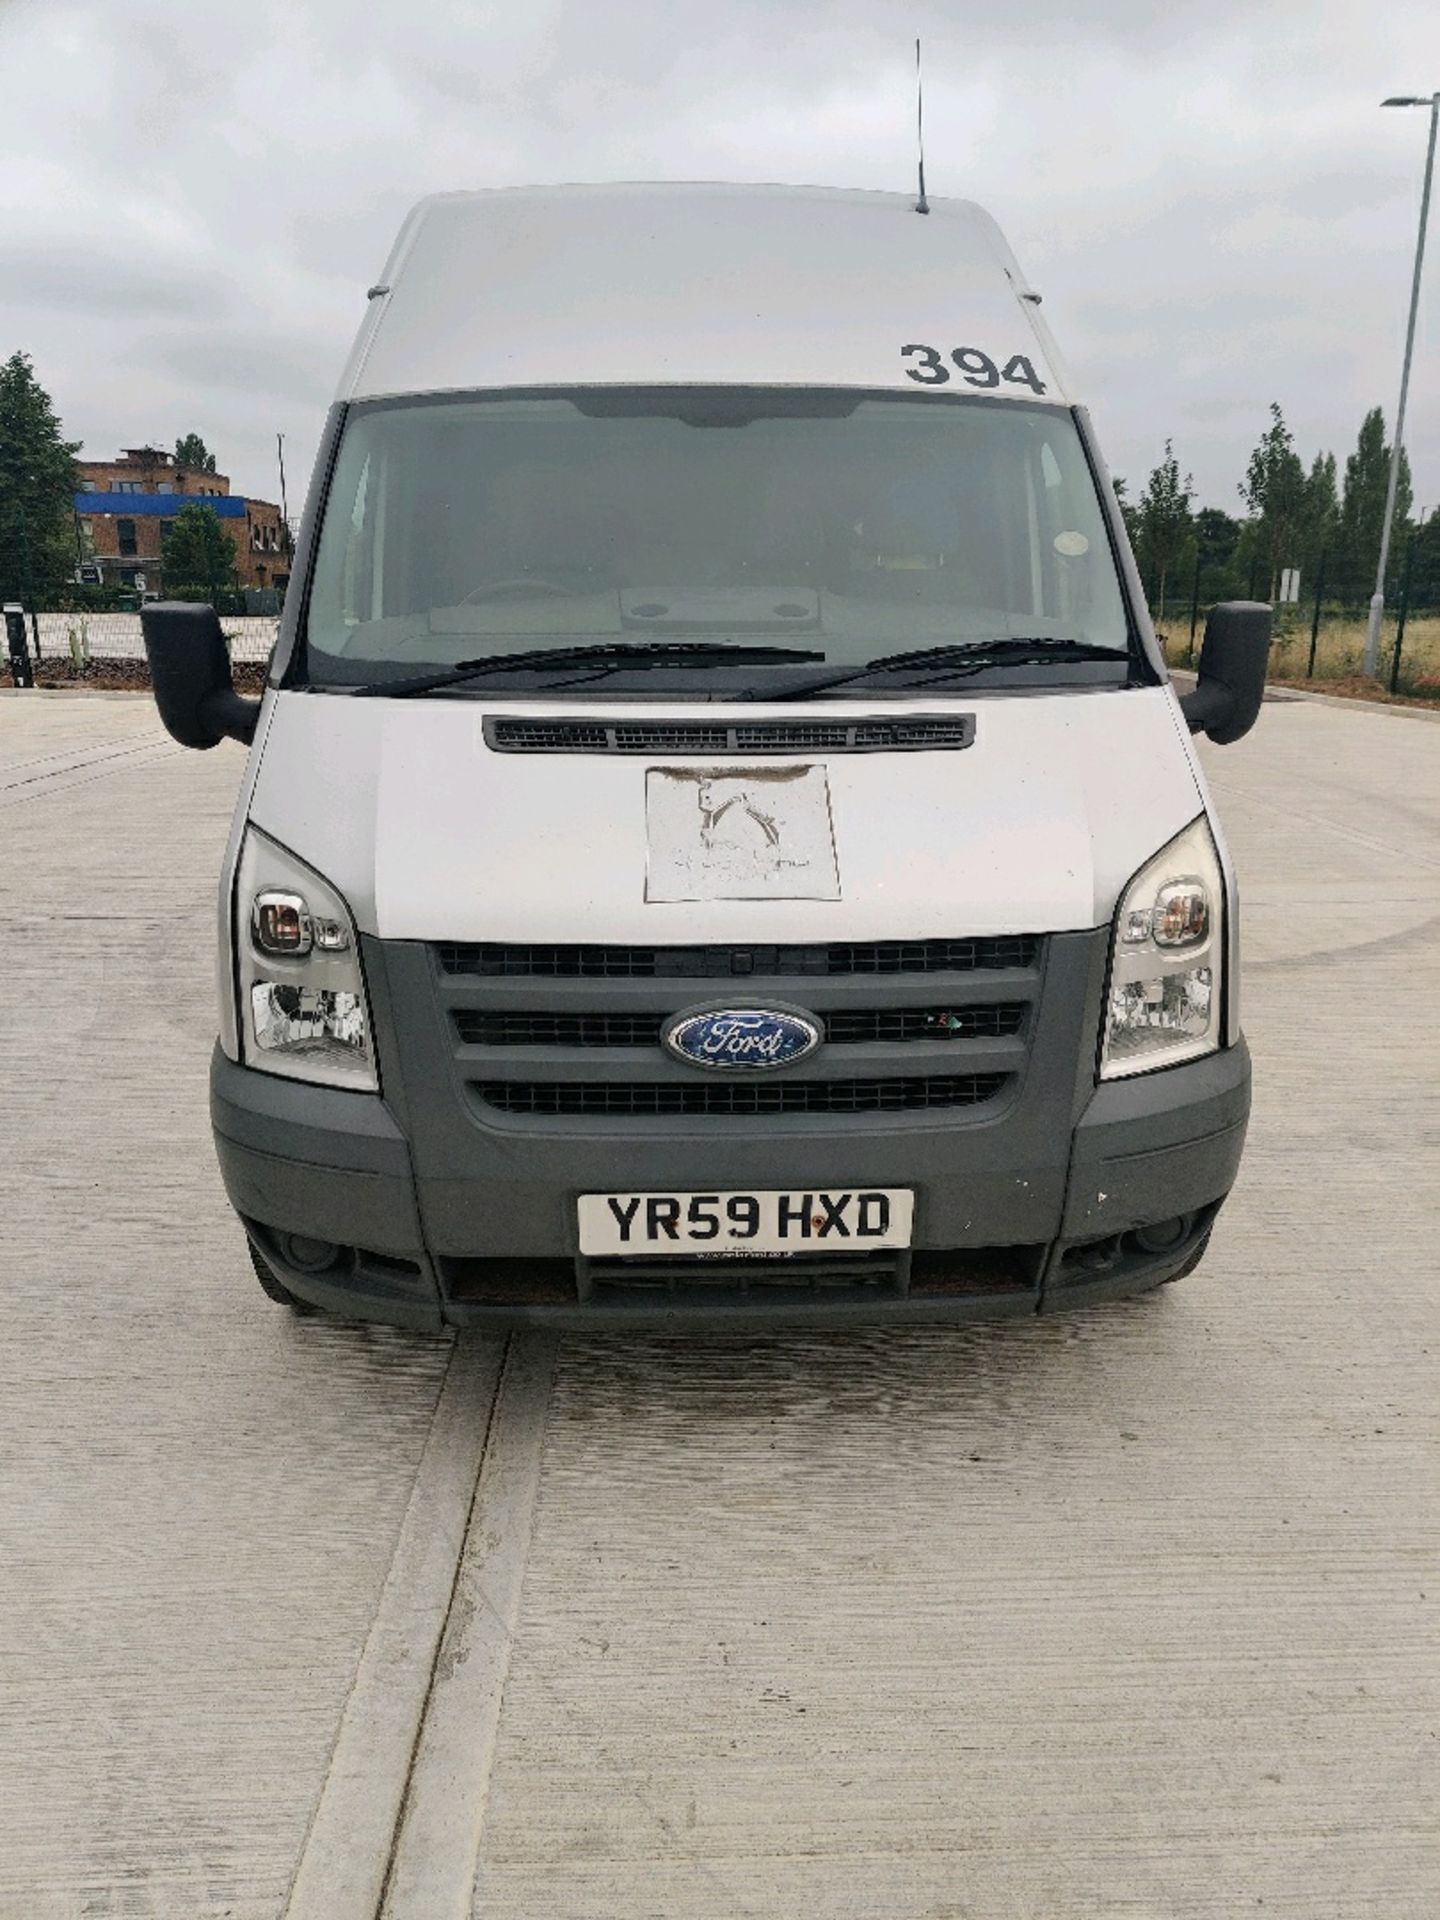 ENTRY DIRECT FROM LOCAL AUTHORITY Ford transit YR59HXD - Image 2 of 21